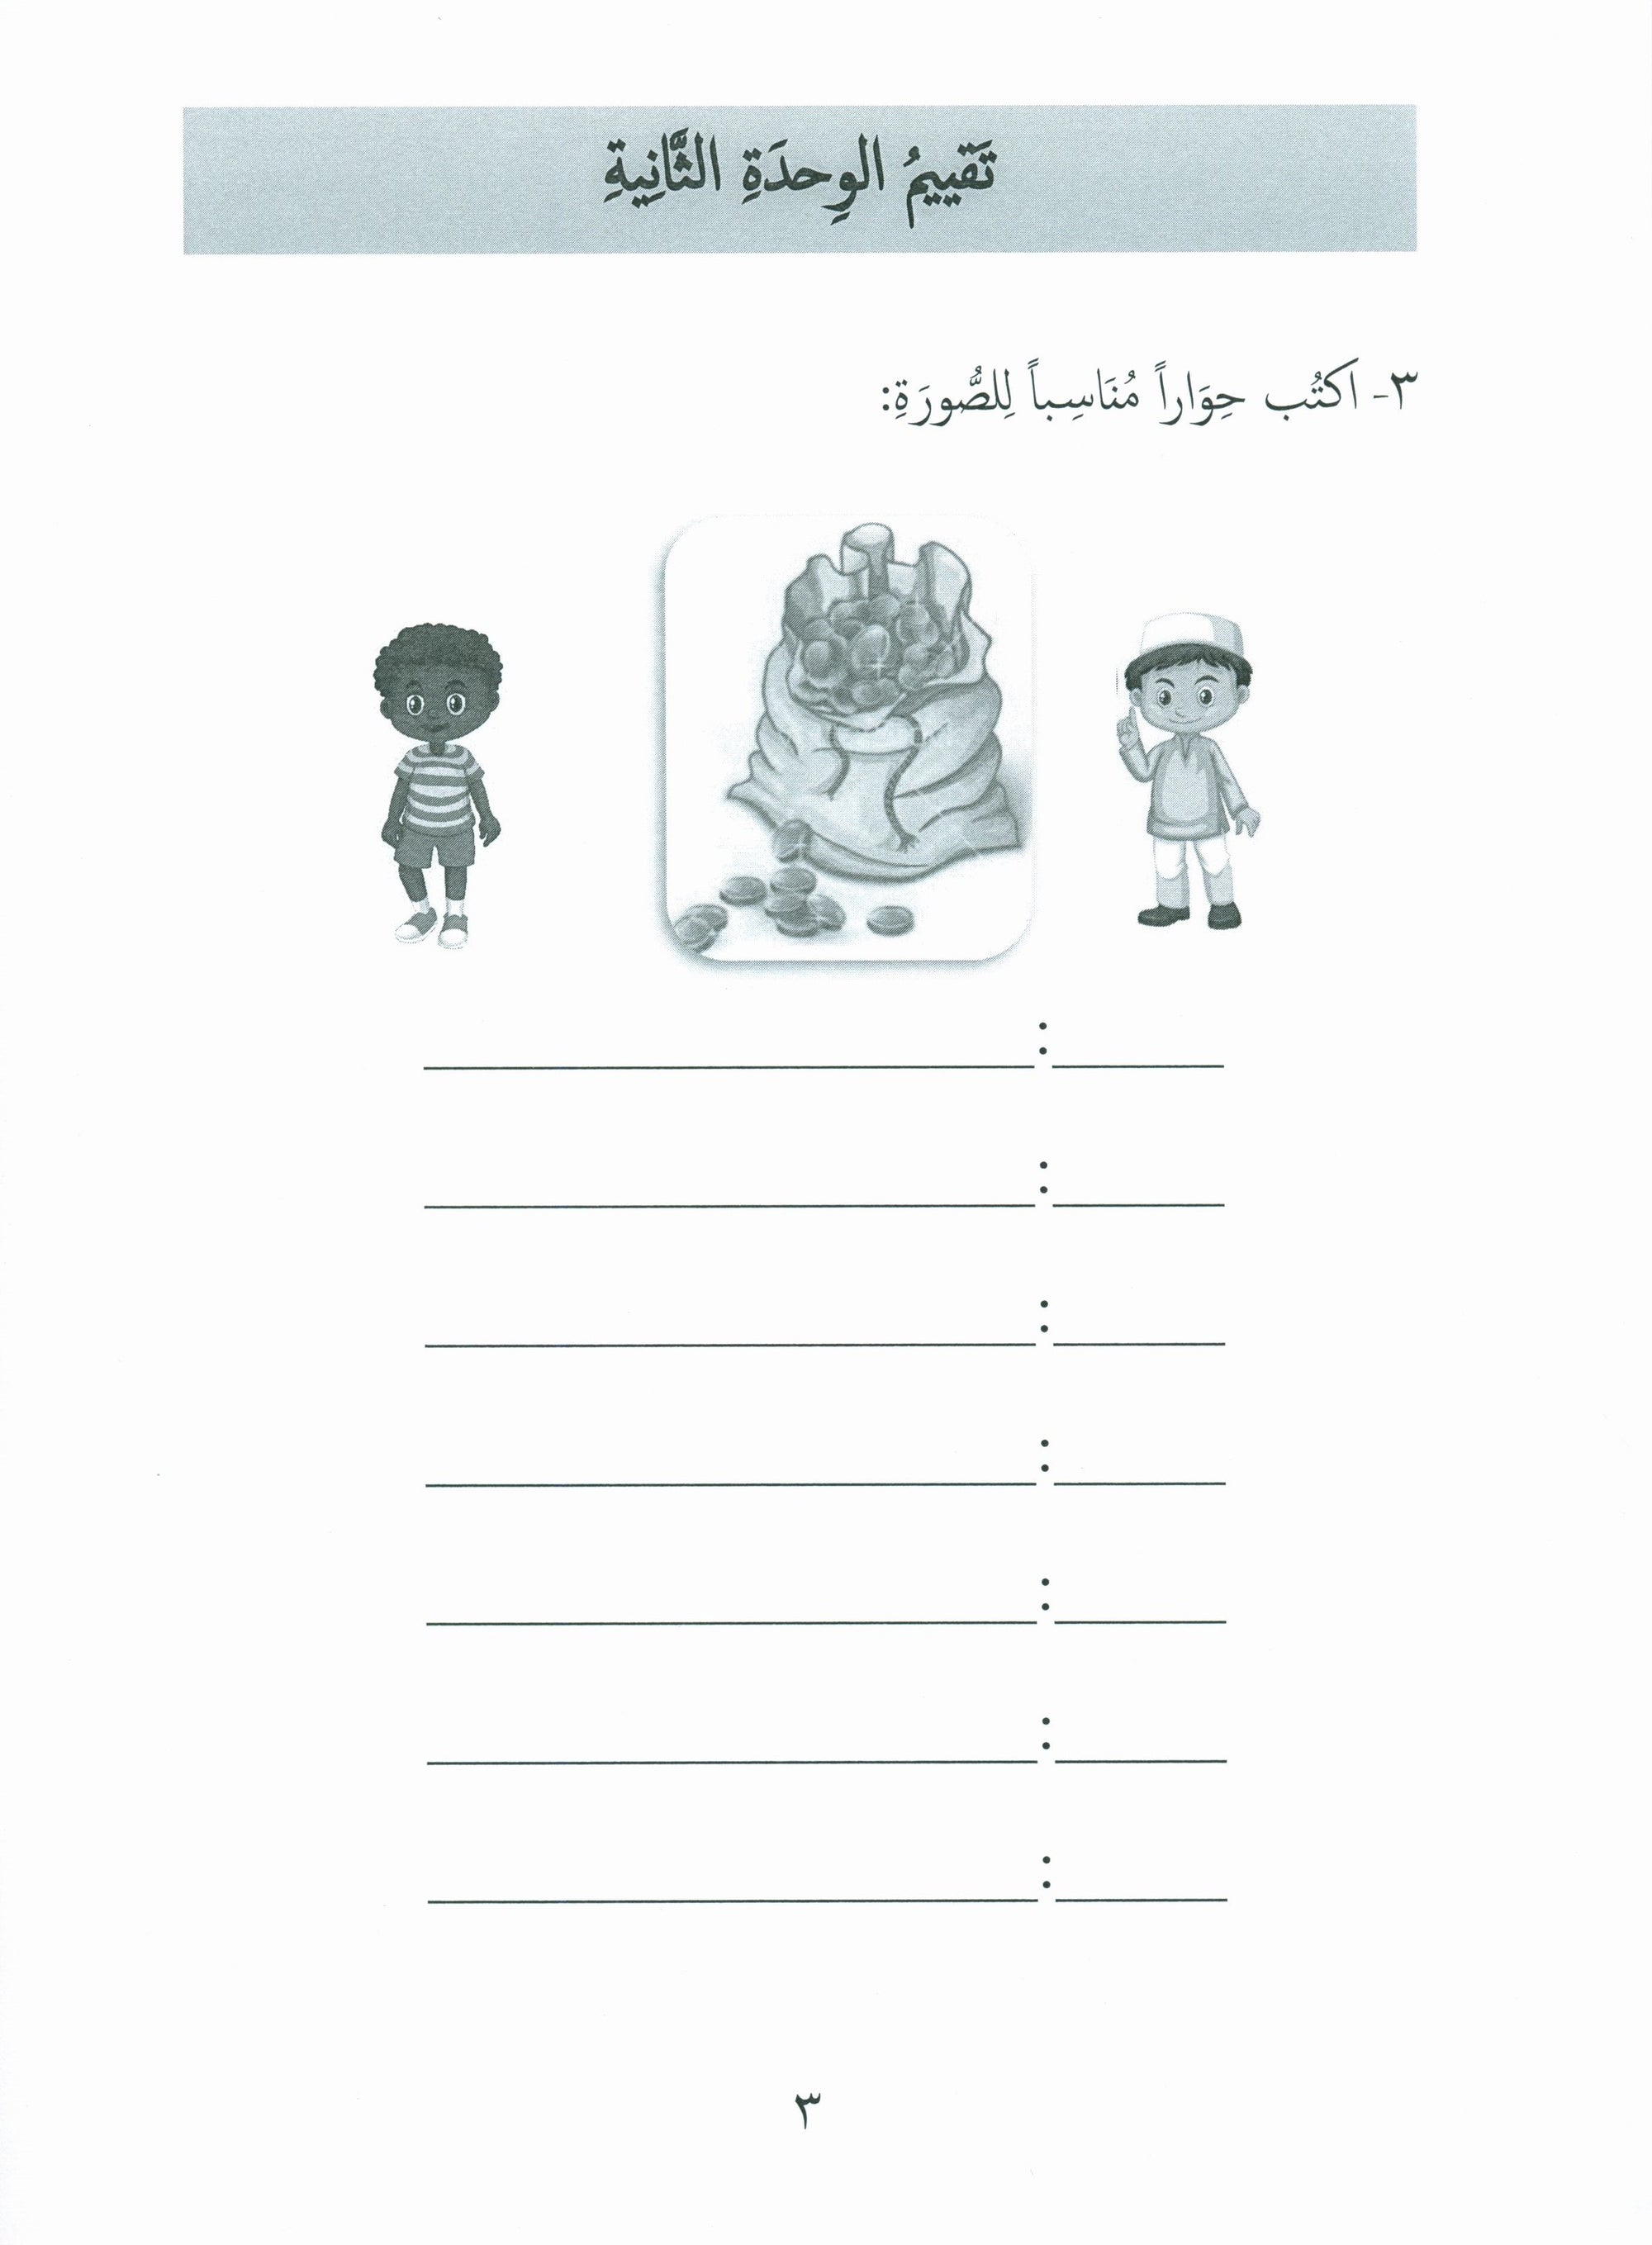 Our Language Is Our Pride Assessment Level 8 لغتنا فخرنا